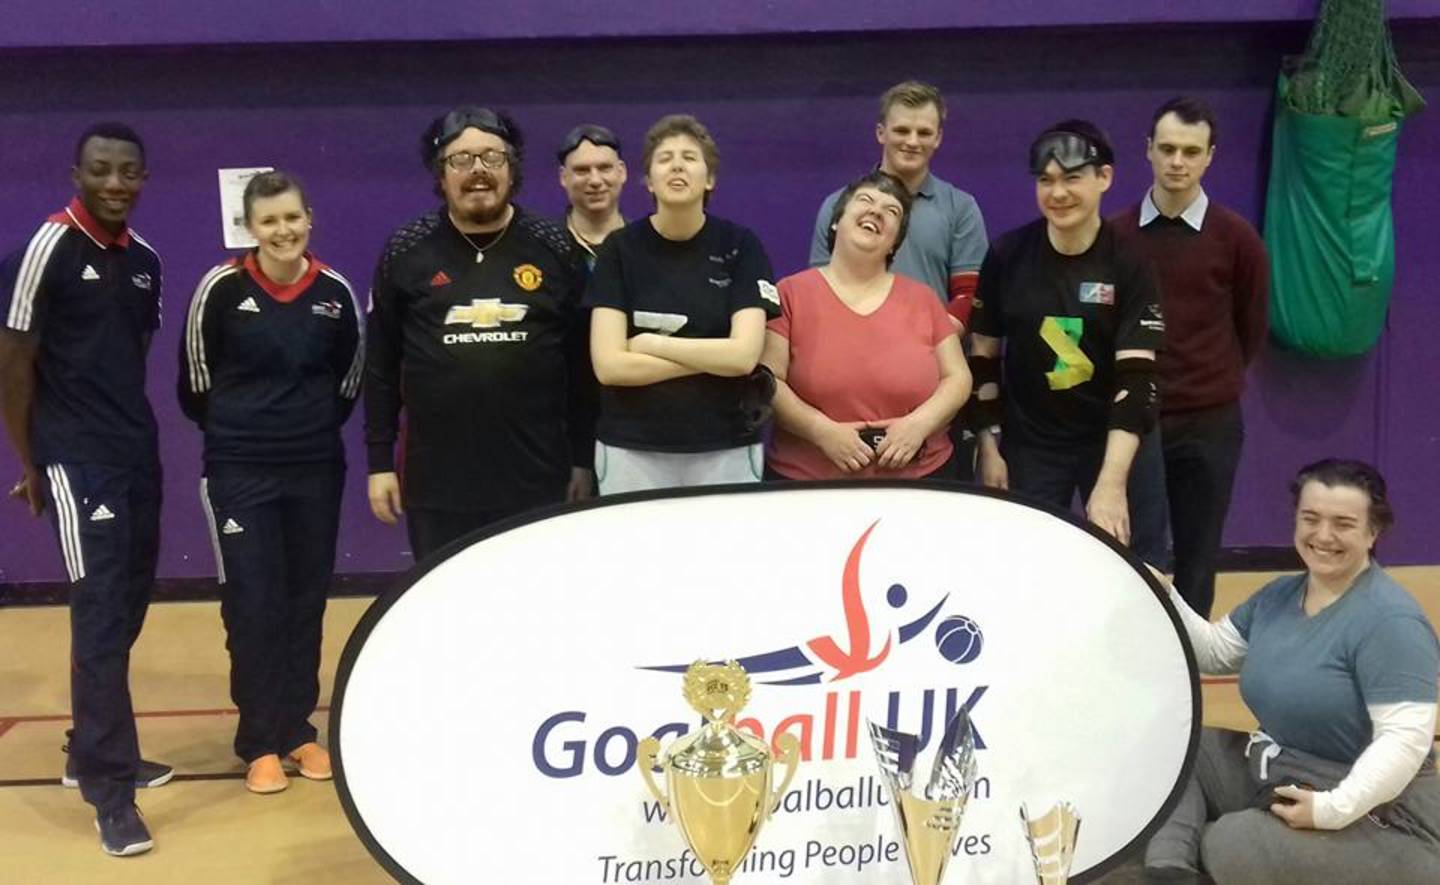 The Beacon Bullets goalball team during the GB Roadshow, where GB Women’s Assistant Coach Becky Ashworth and GB Men’s player Caleb Nanevie came to visit with the Euro Championships Trophies.